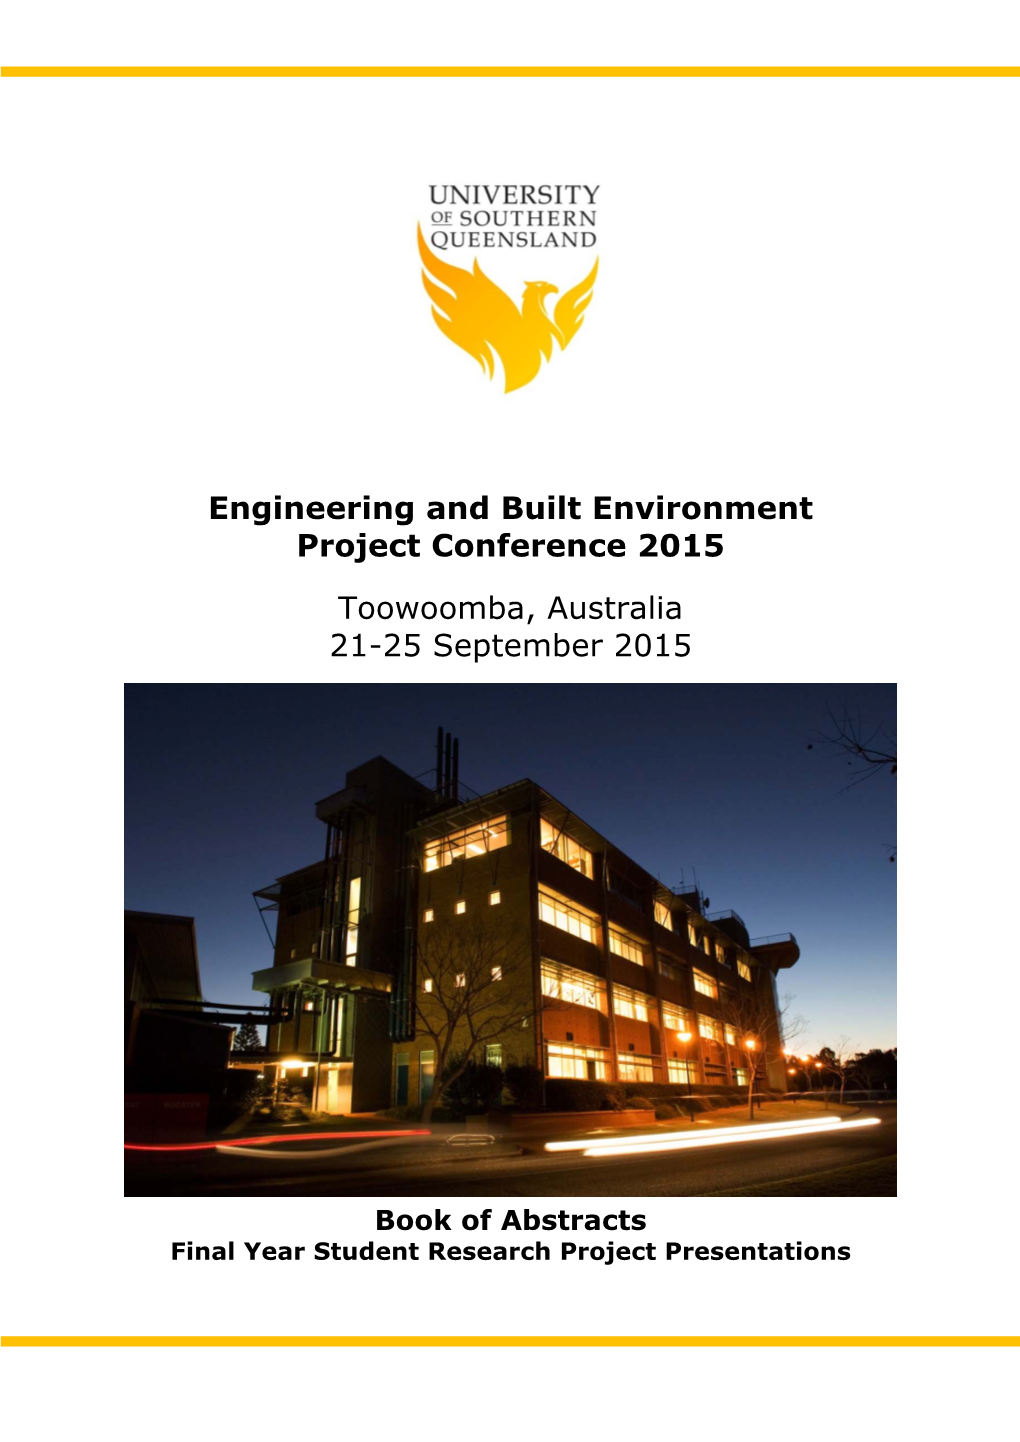 Engineering and Built Environment Project Conference 2015 Book Of